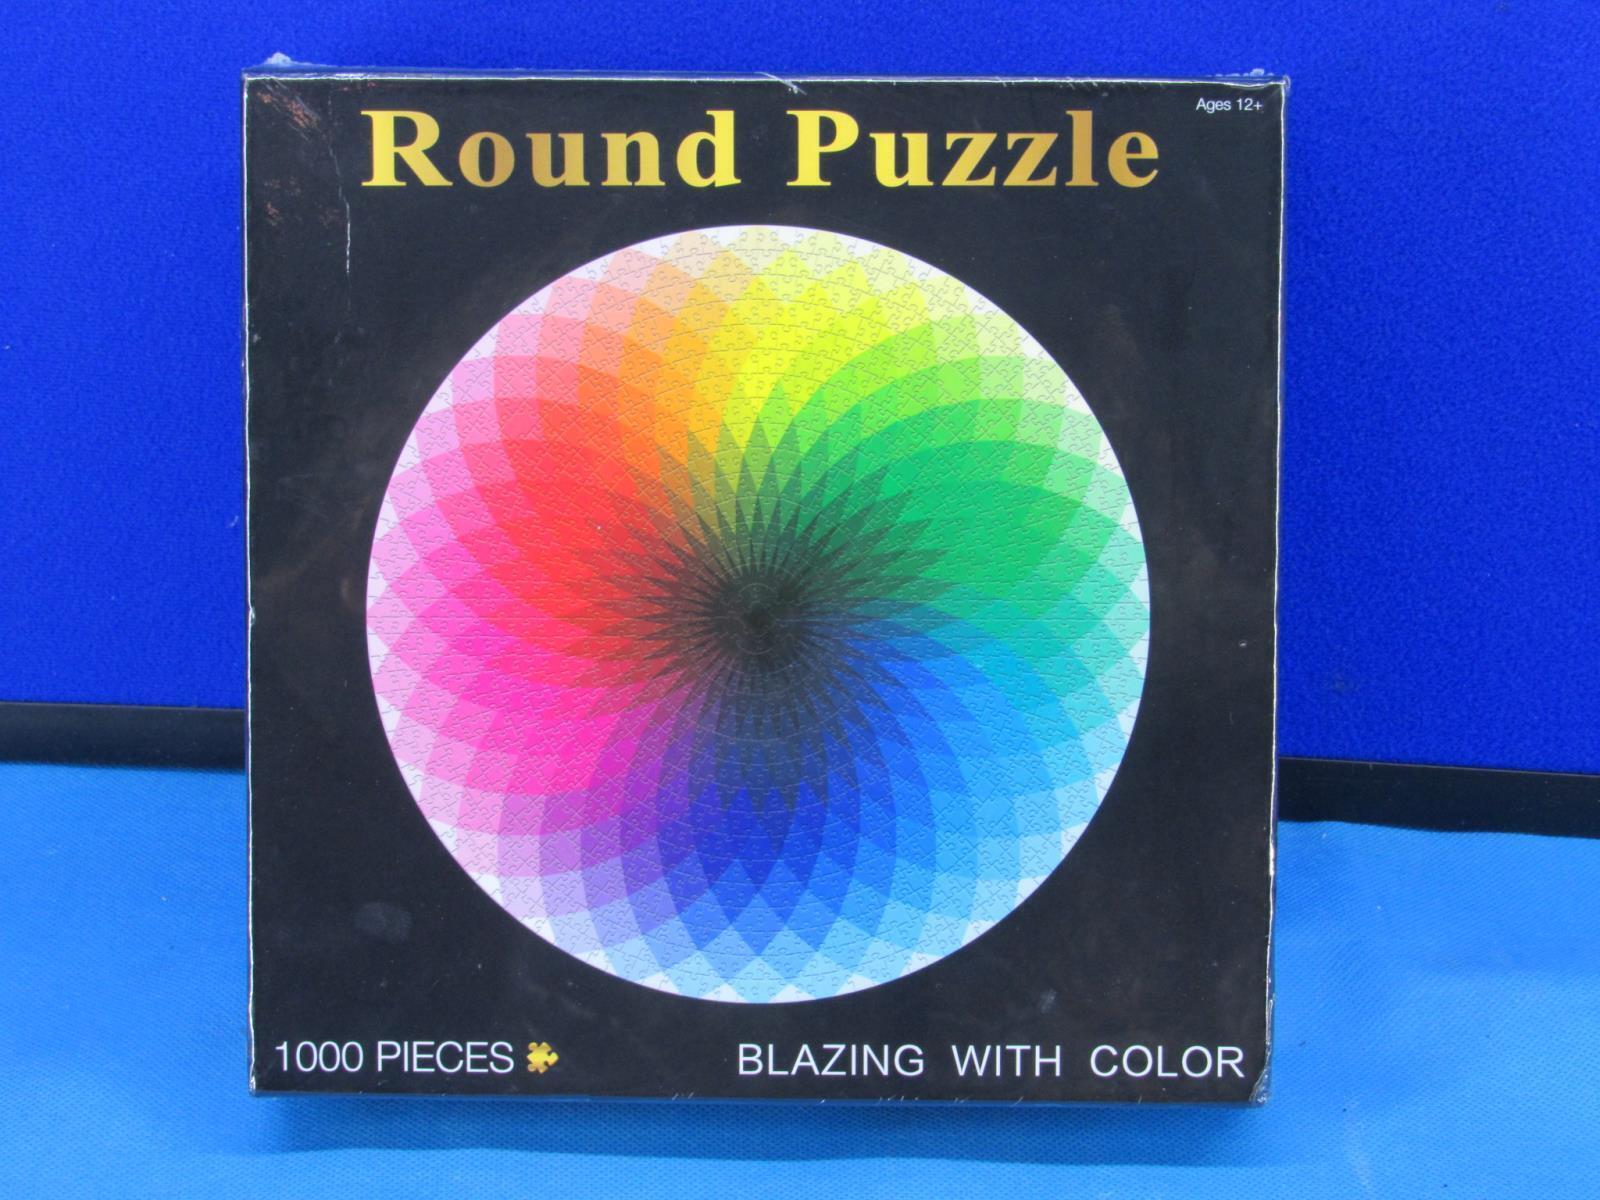 New Sealed Honley Toy Puzzle 1000 Pc Jigsaw BLAZING WITH COLOR Round Puzzle